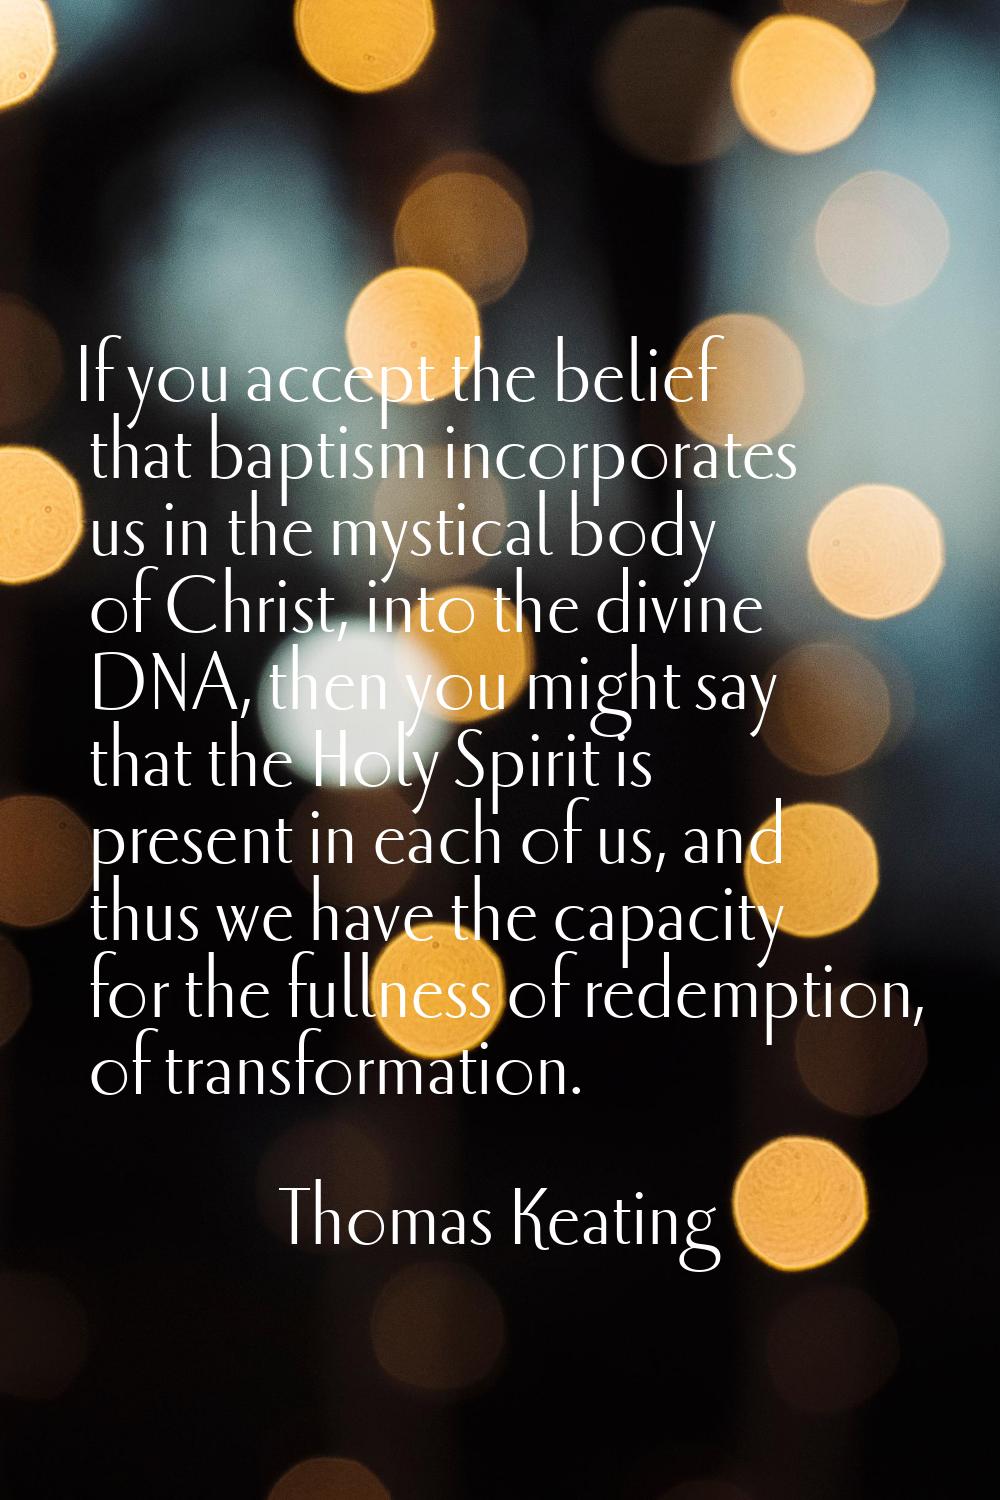 If you accept the belief that baptism incorporates us in the mystical body of Christ, into the divi